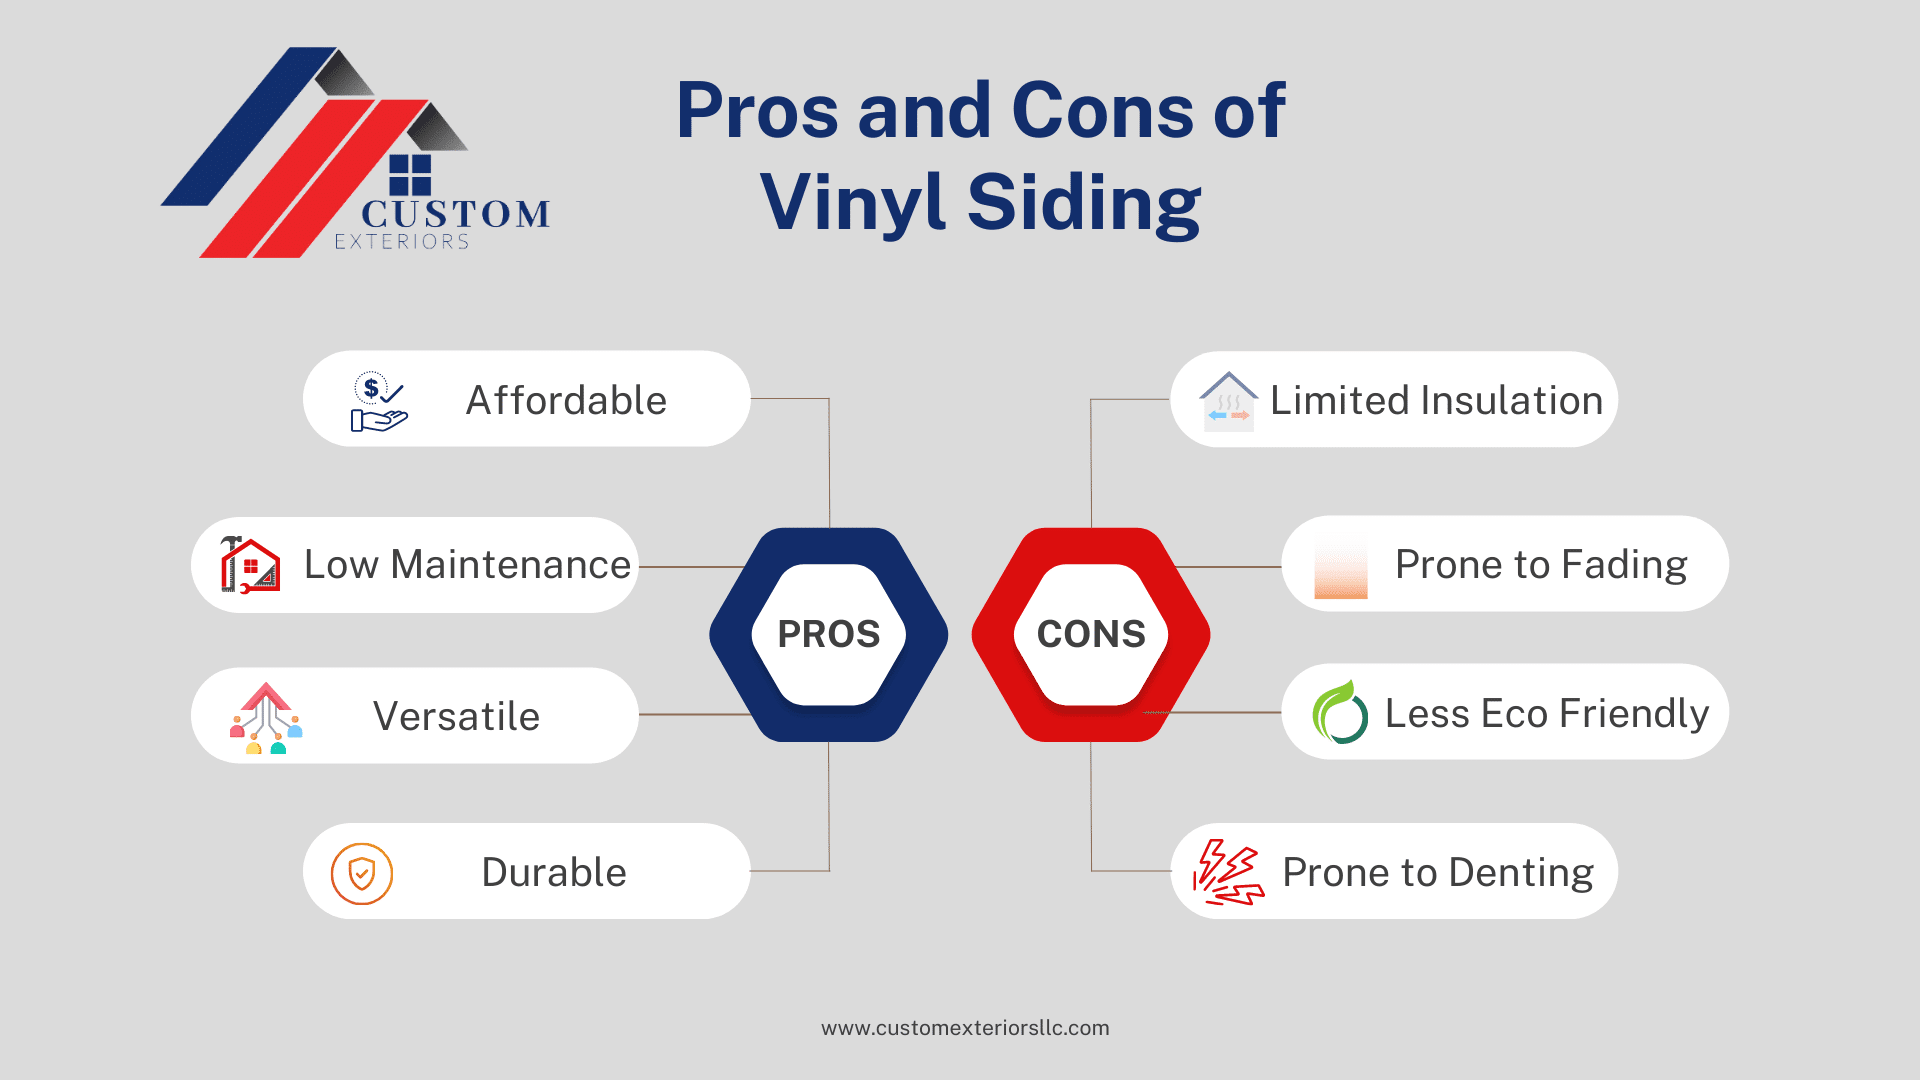 The Pros and Cons of vinyl siding